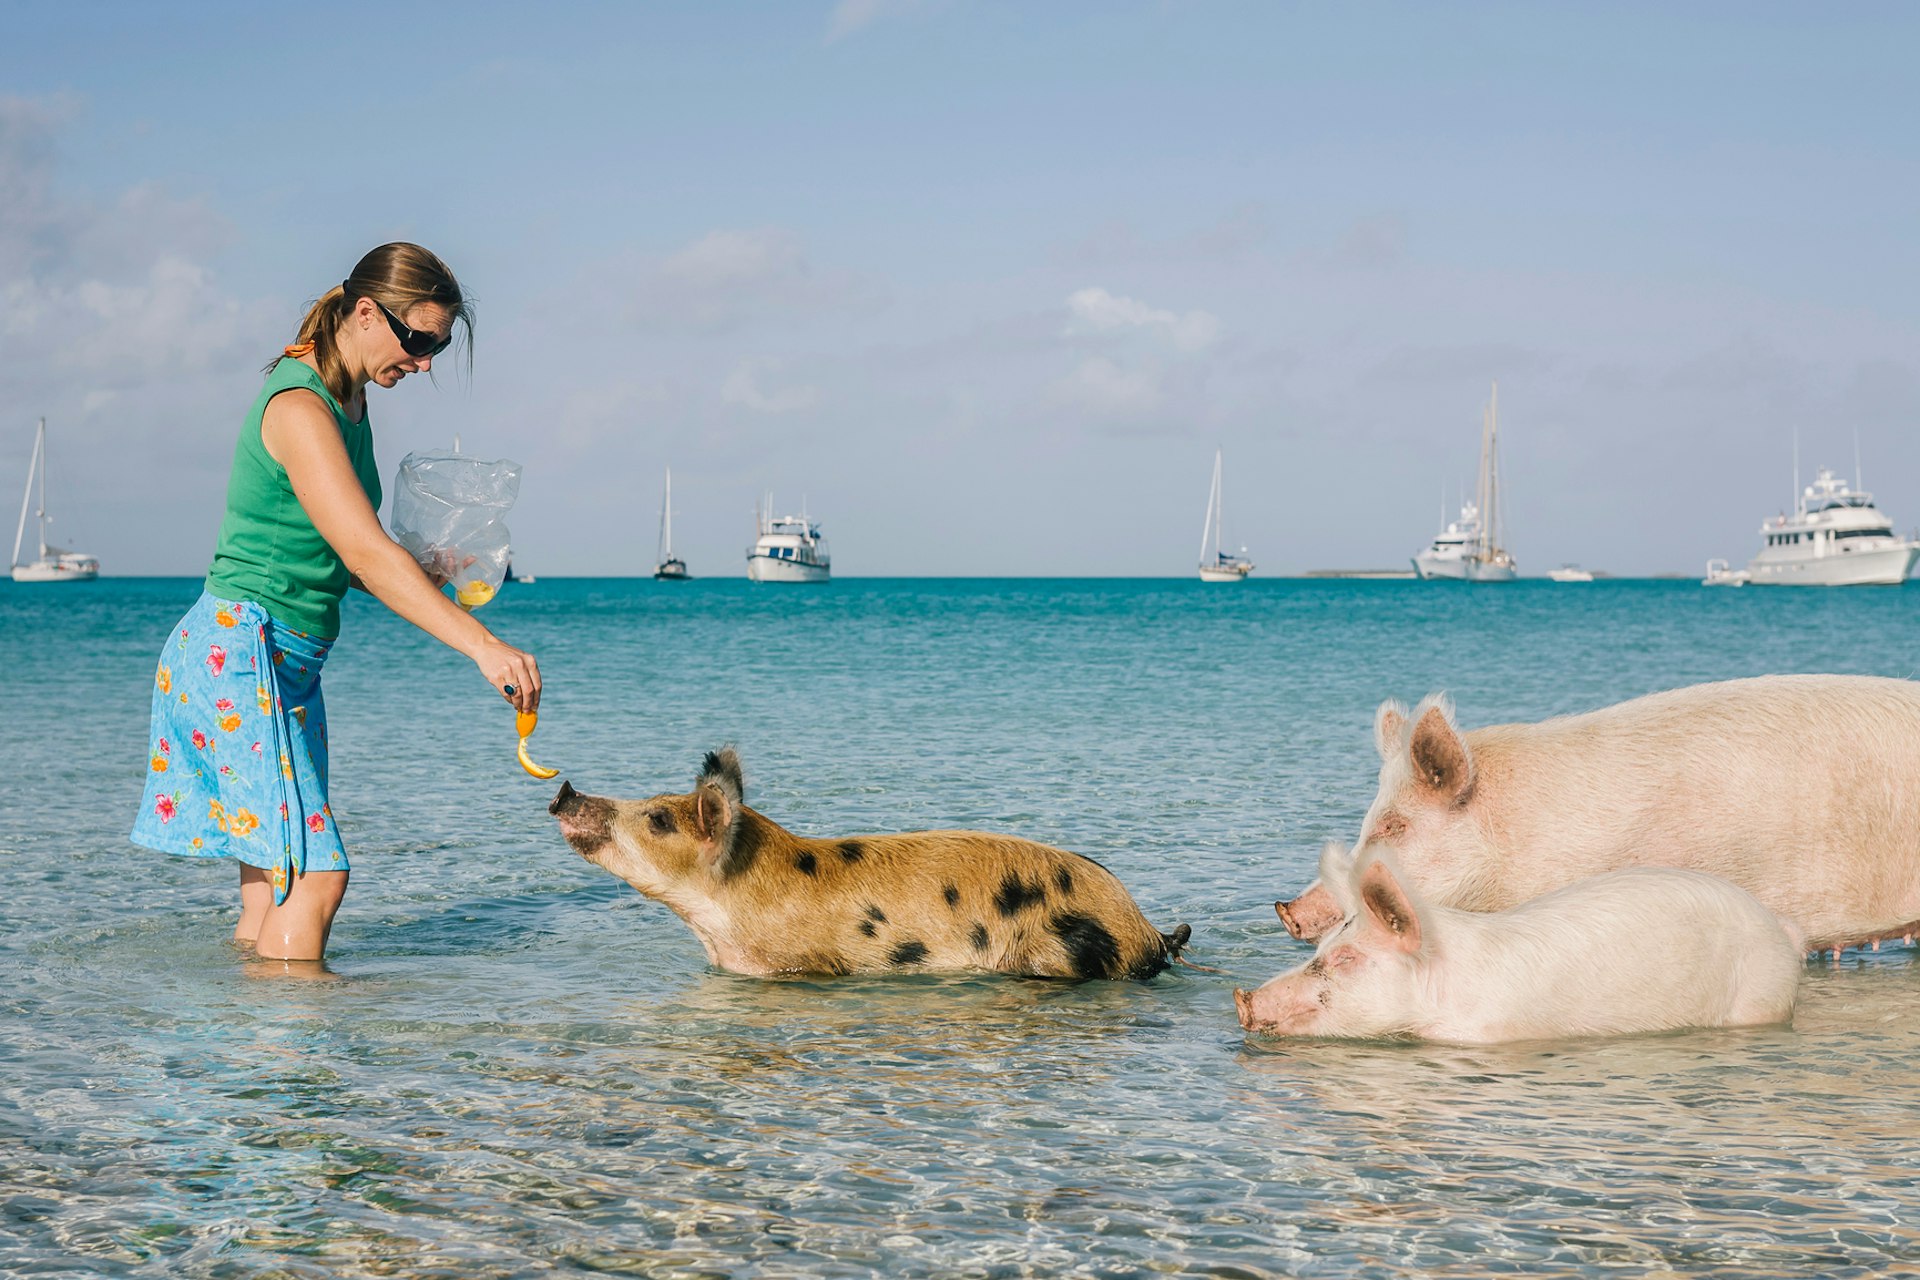 A woman stands in the shallows of the ocean feeding orange peel to a swimming pig